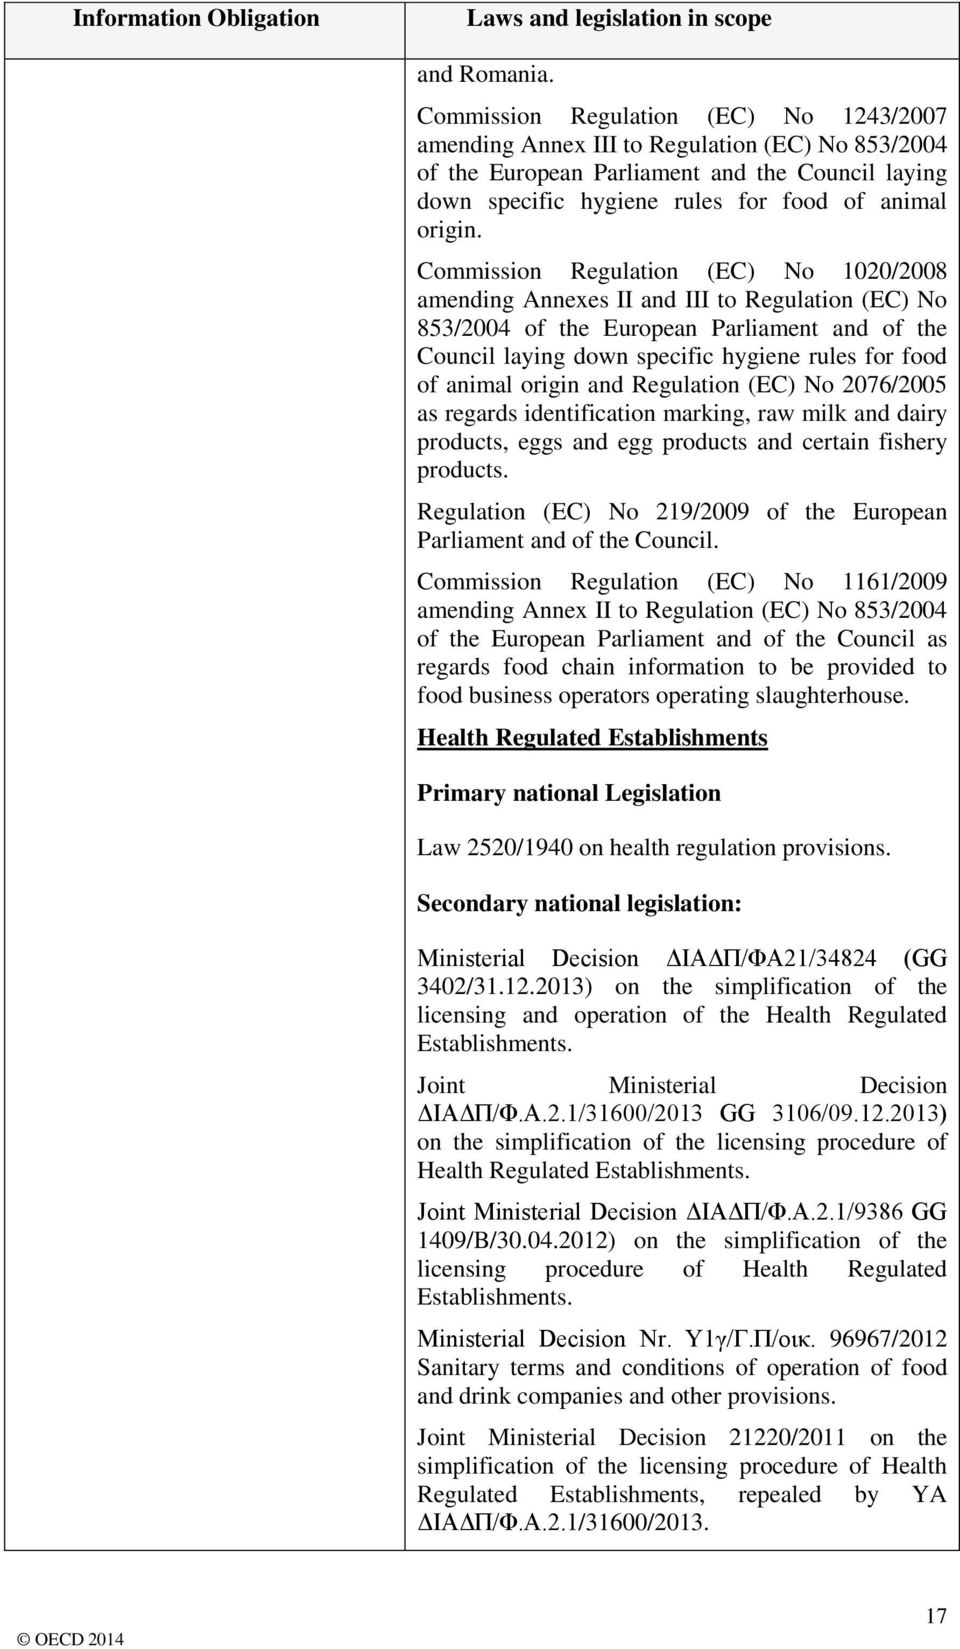 Commission Regulation (EC) No 1020/2008 amending Annexes II and III to Regulation (EC) No 853/2004 of the European Parliament and of the Council laying down specific hygiene rules for food of animal